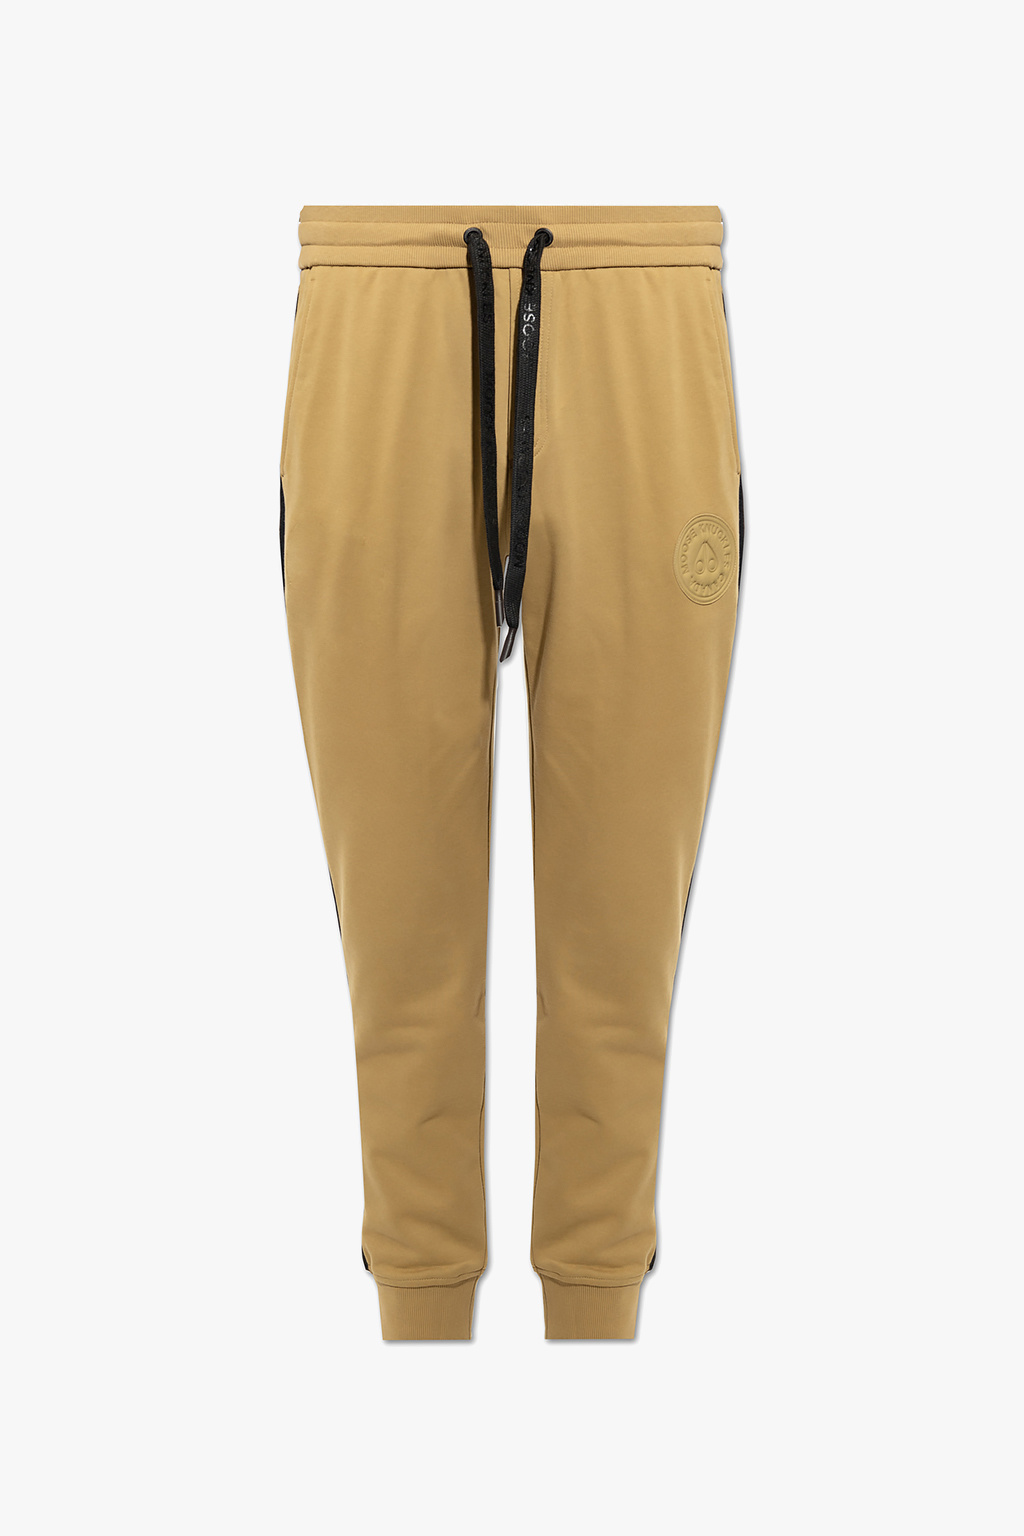 Moose Knuckles Sweatpants with patch